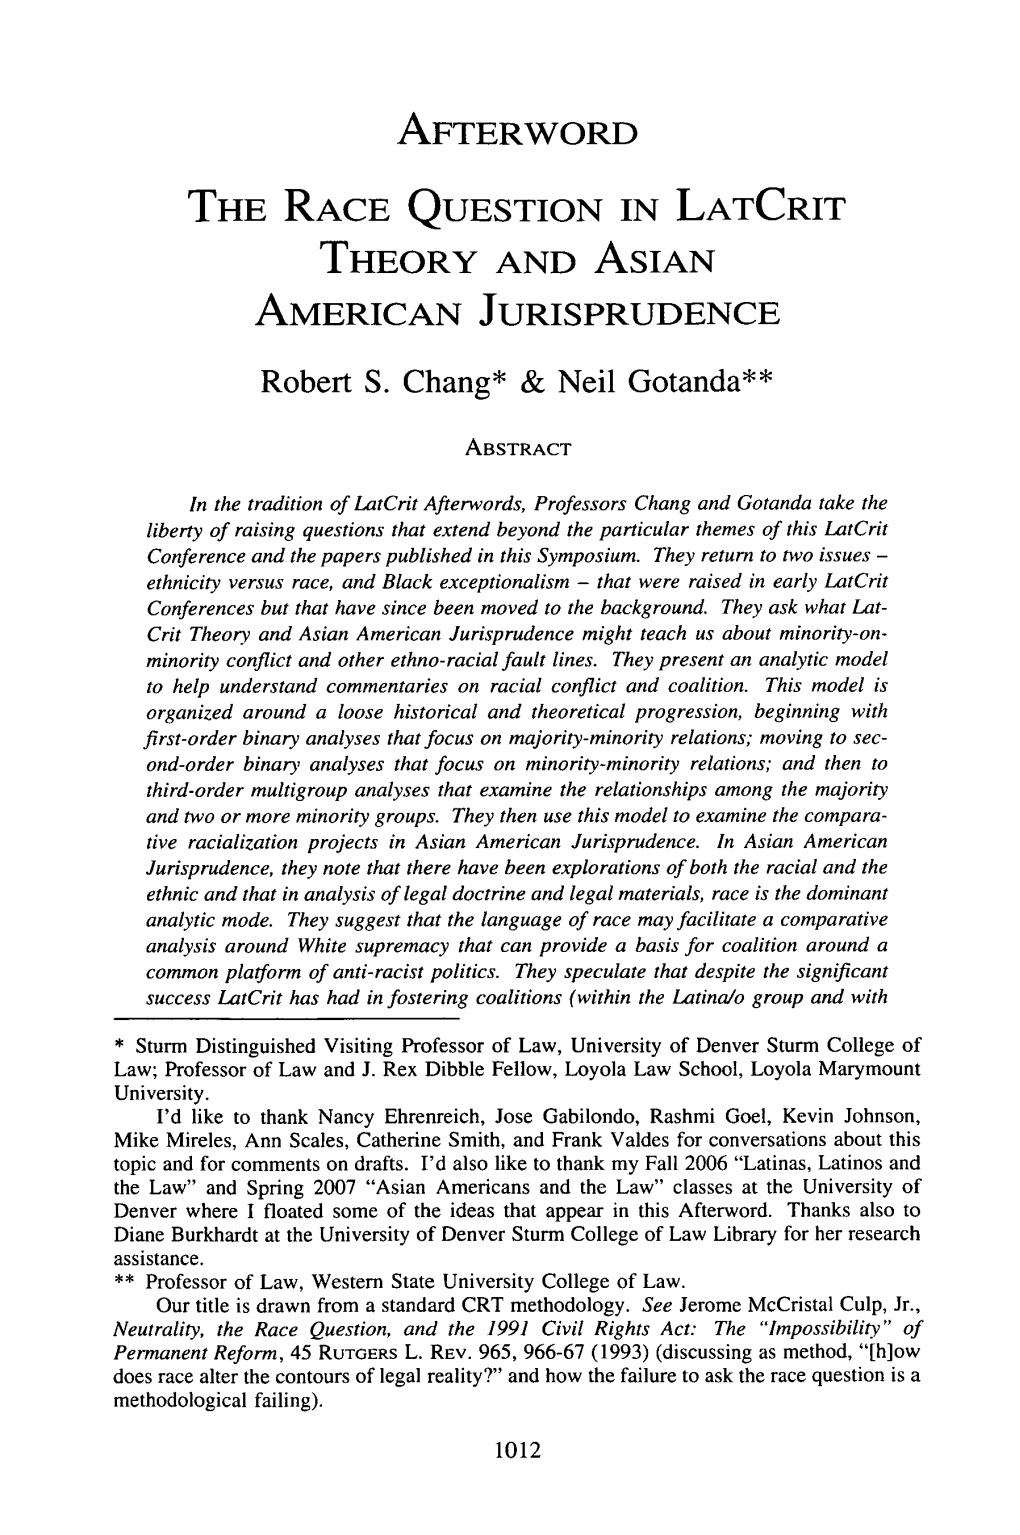 The Race Question in Latcrit Theory and Asian American Jurisprudence